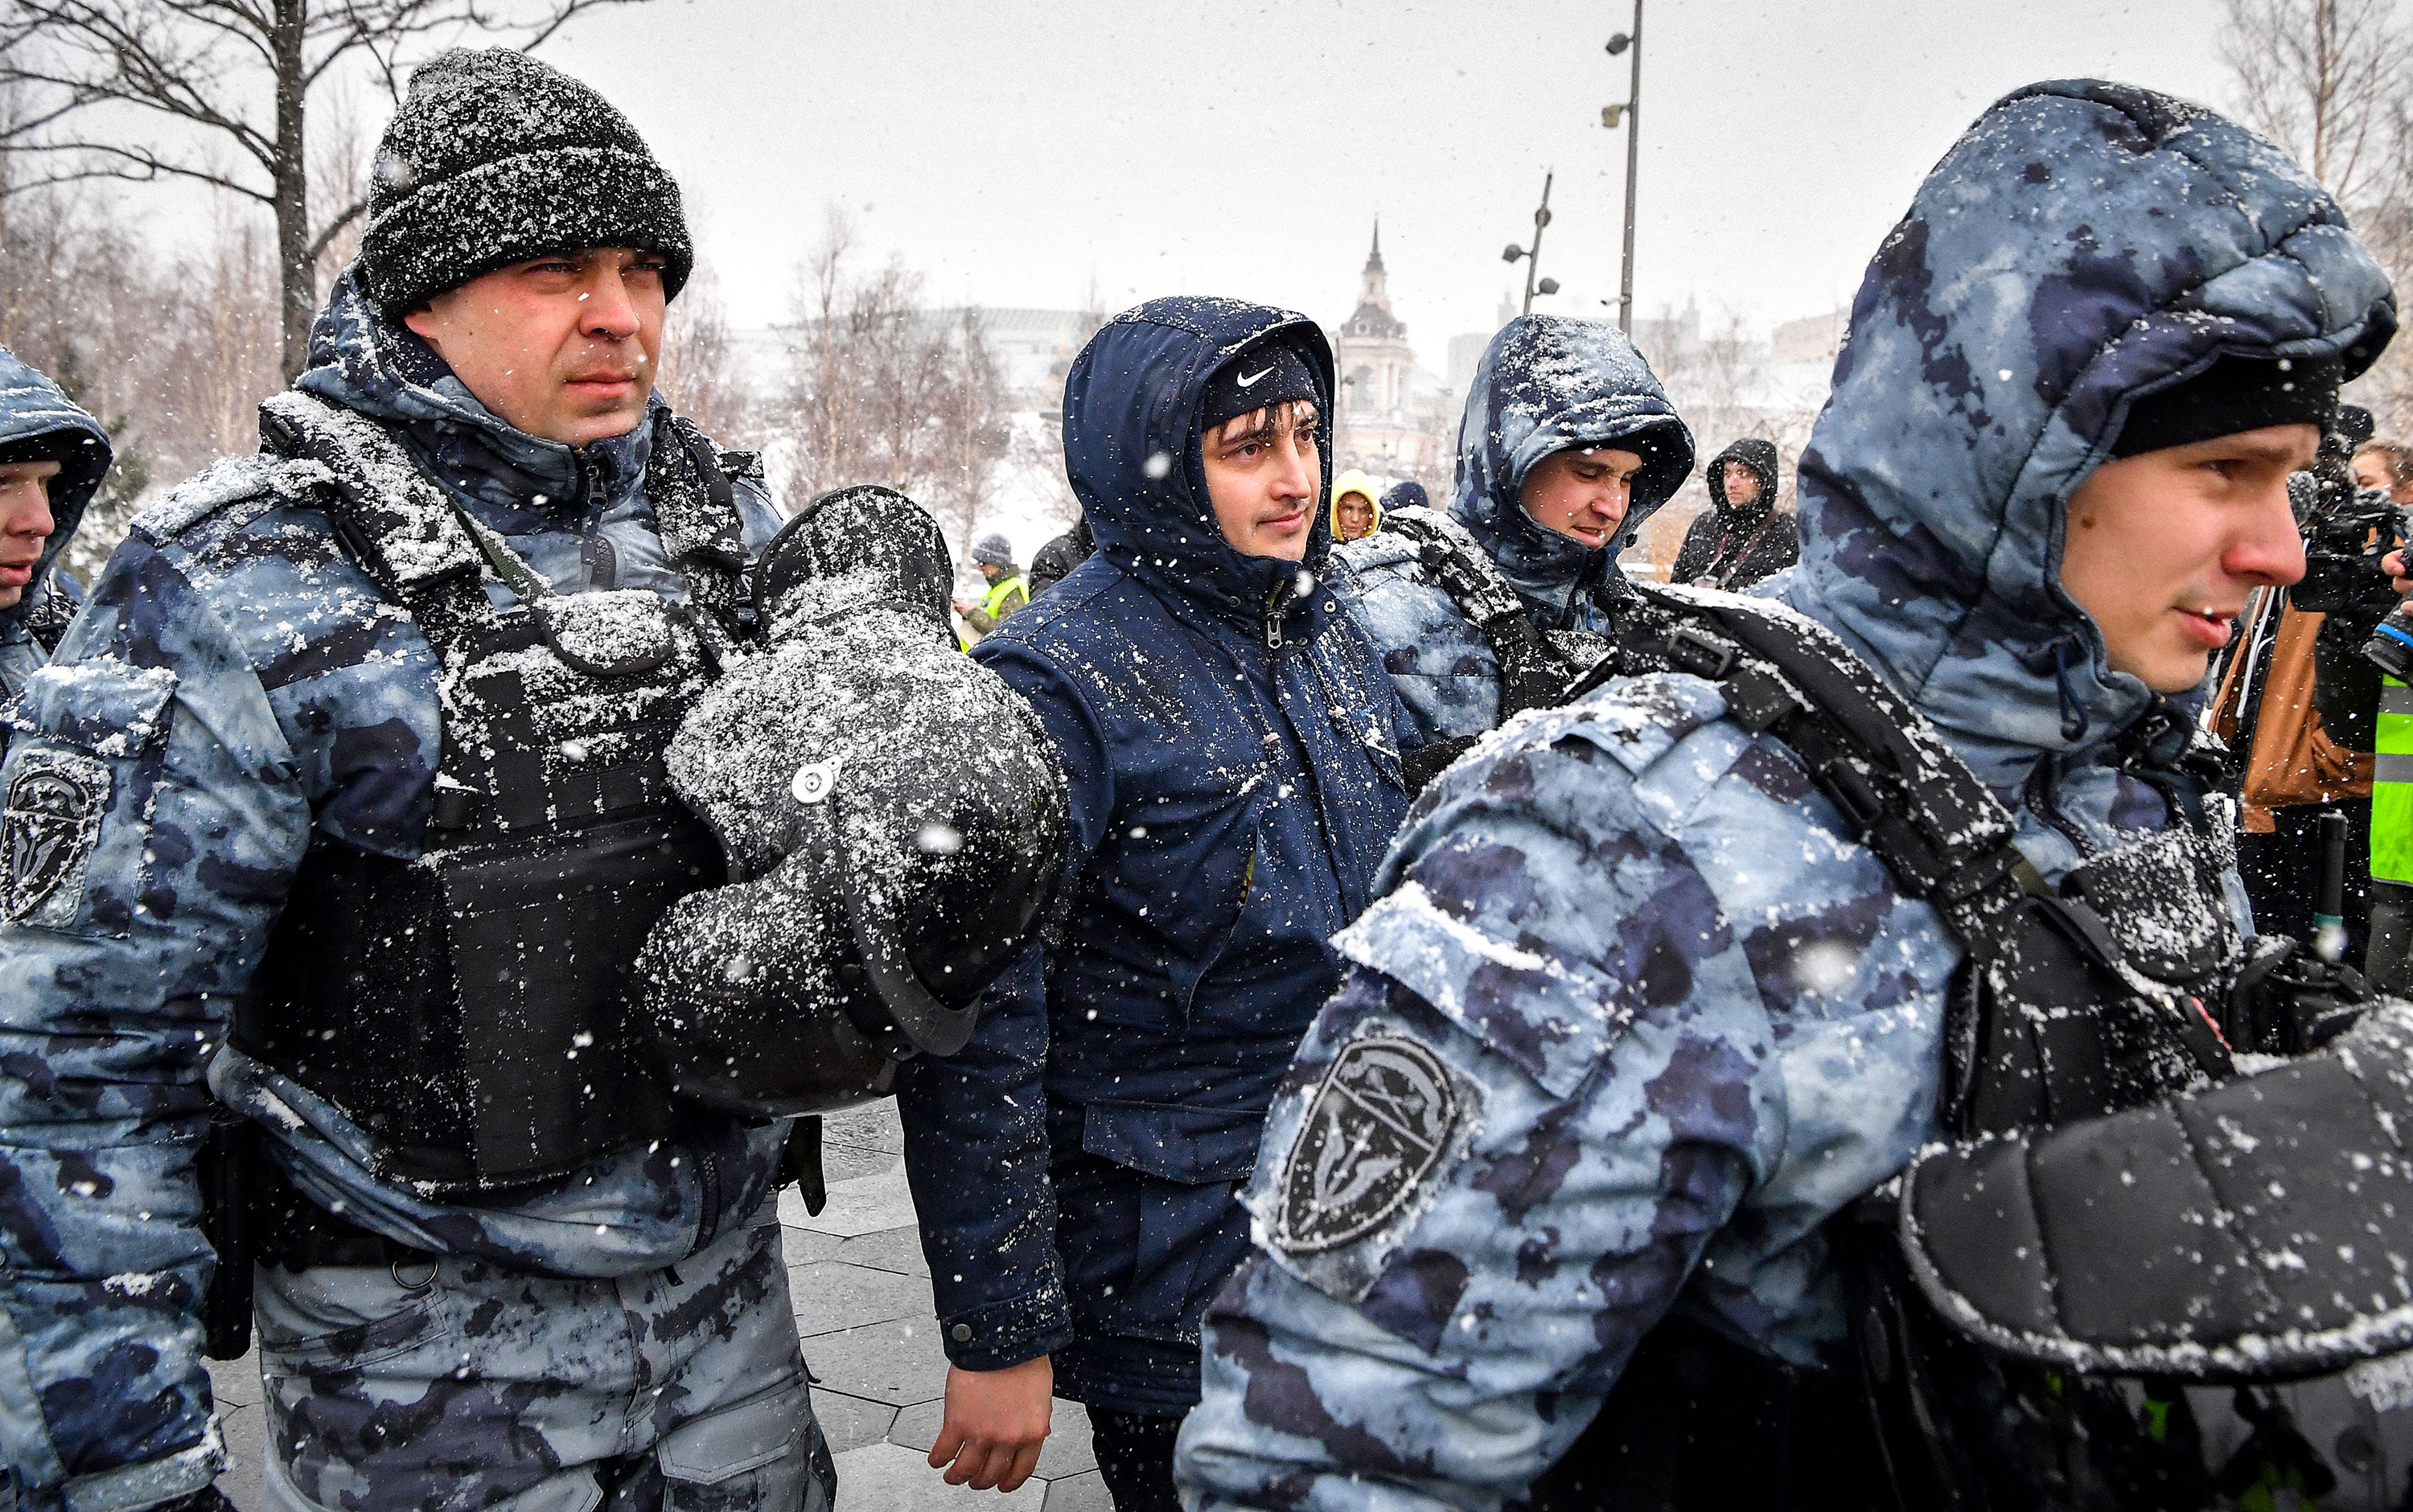 Police officers detain a man during a protest against Russia's military actions in Ukraine, in central Moscow on April 2.